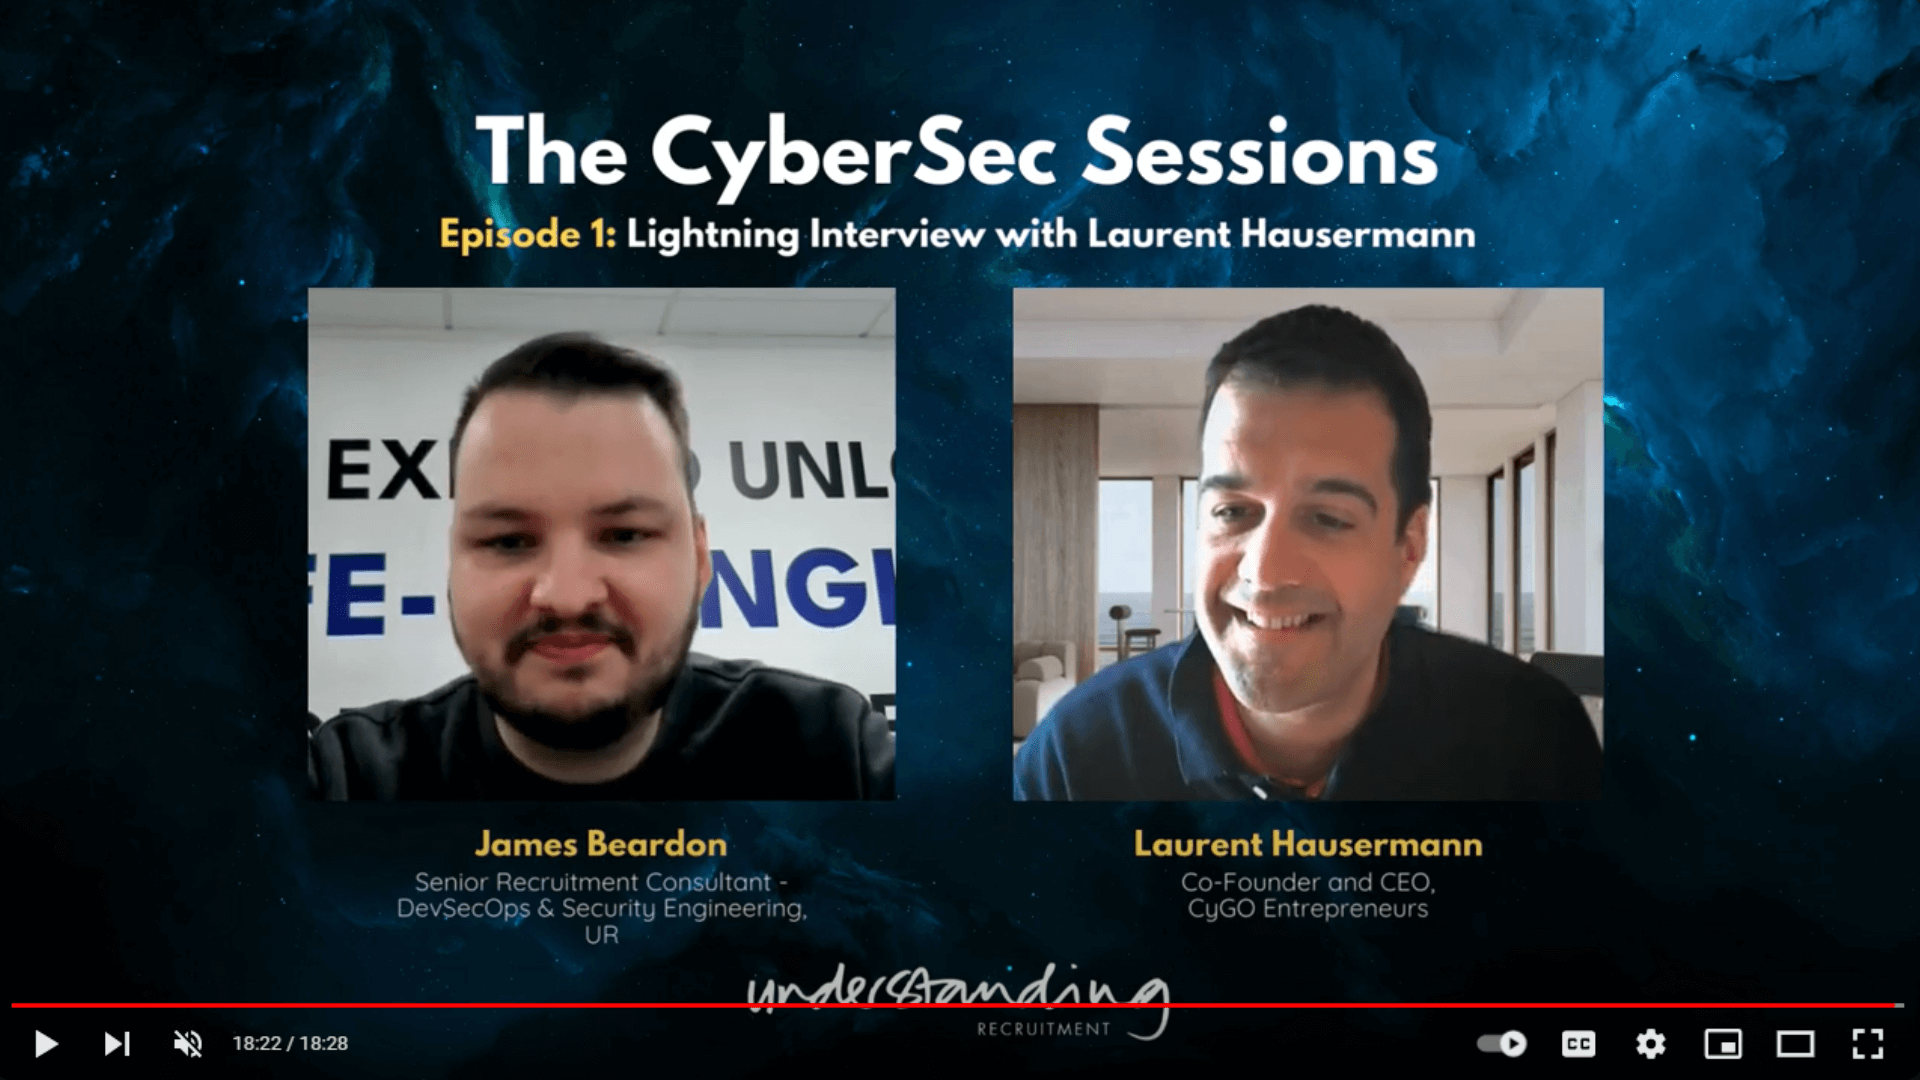 The CyberSec Sessions Episode 1: Lightning interview with Laurent Hausermann